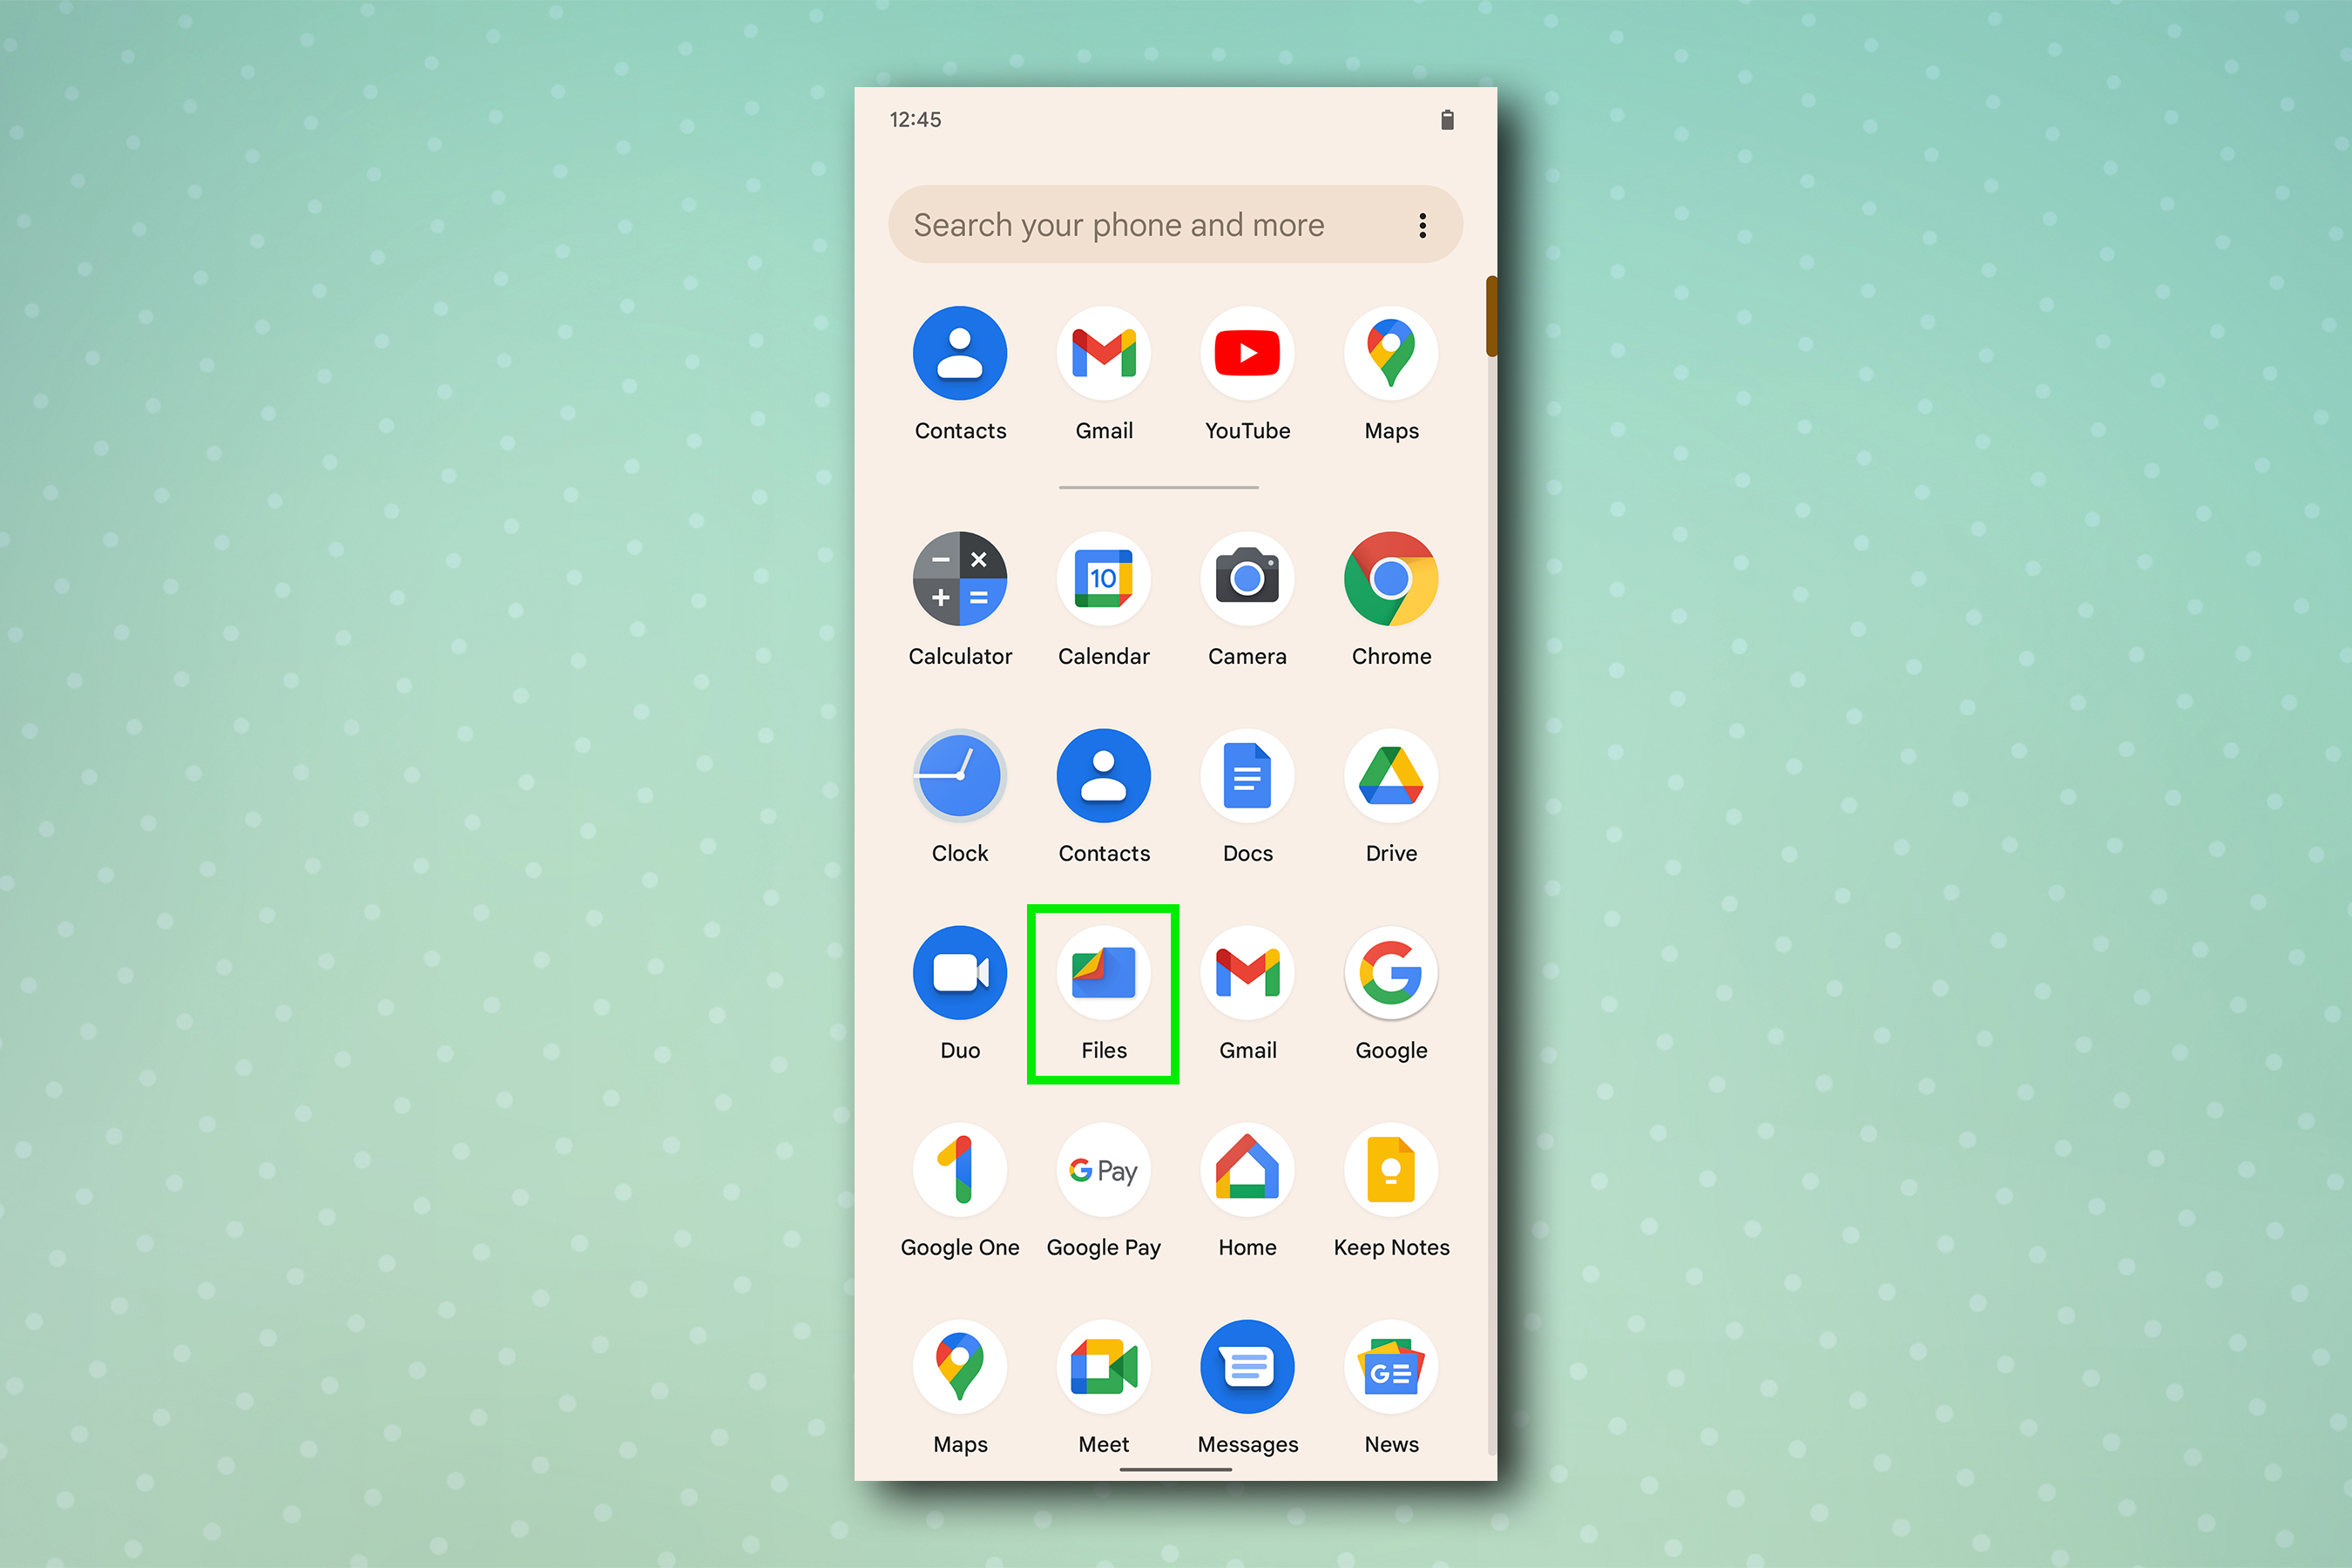 An image of the Apps menu on a Google phone, with the Files folder highlighted